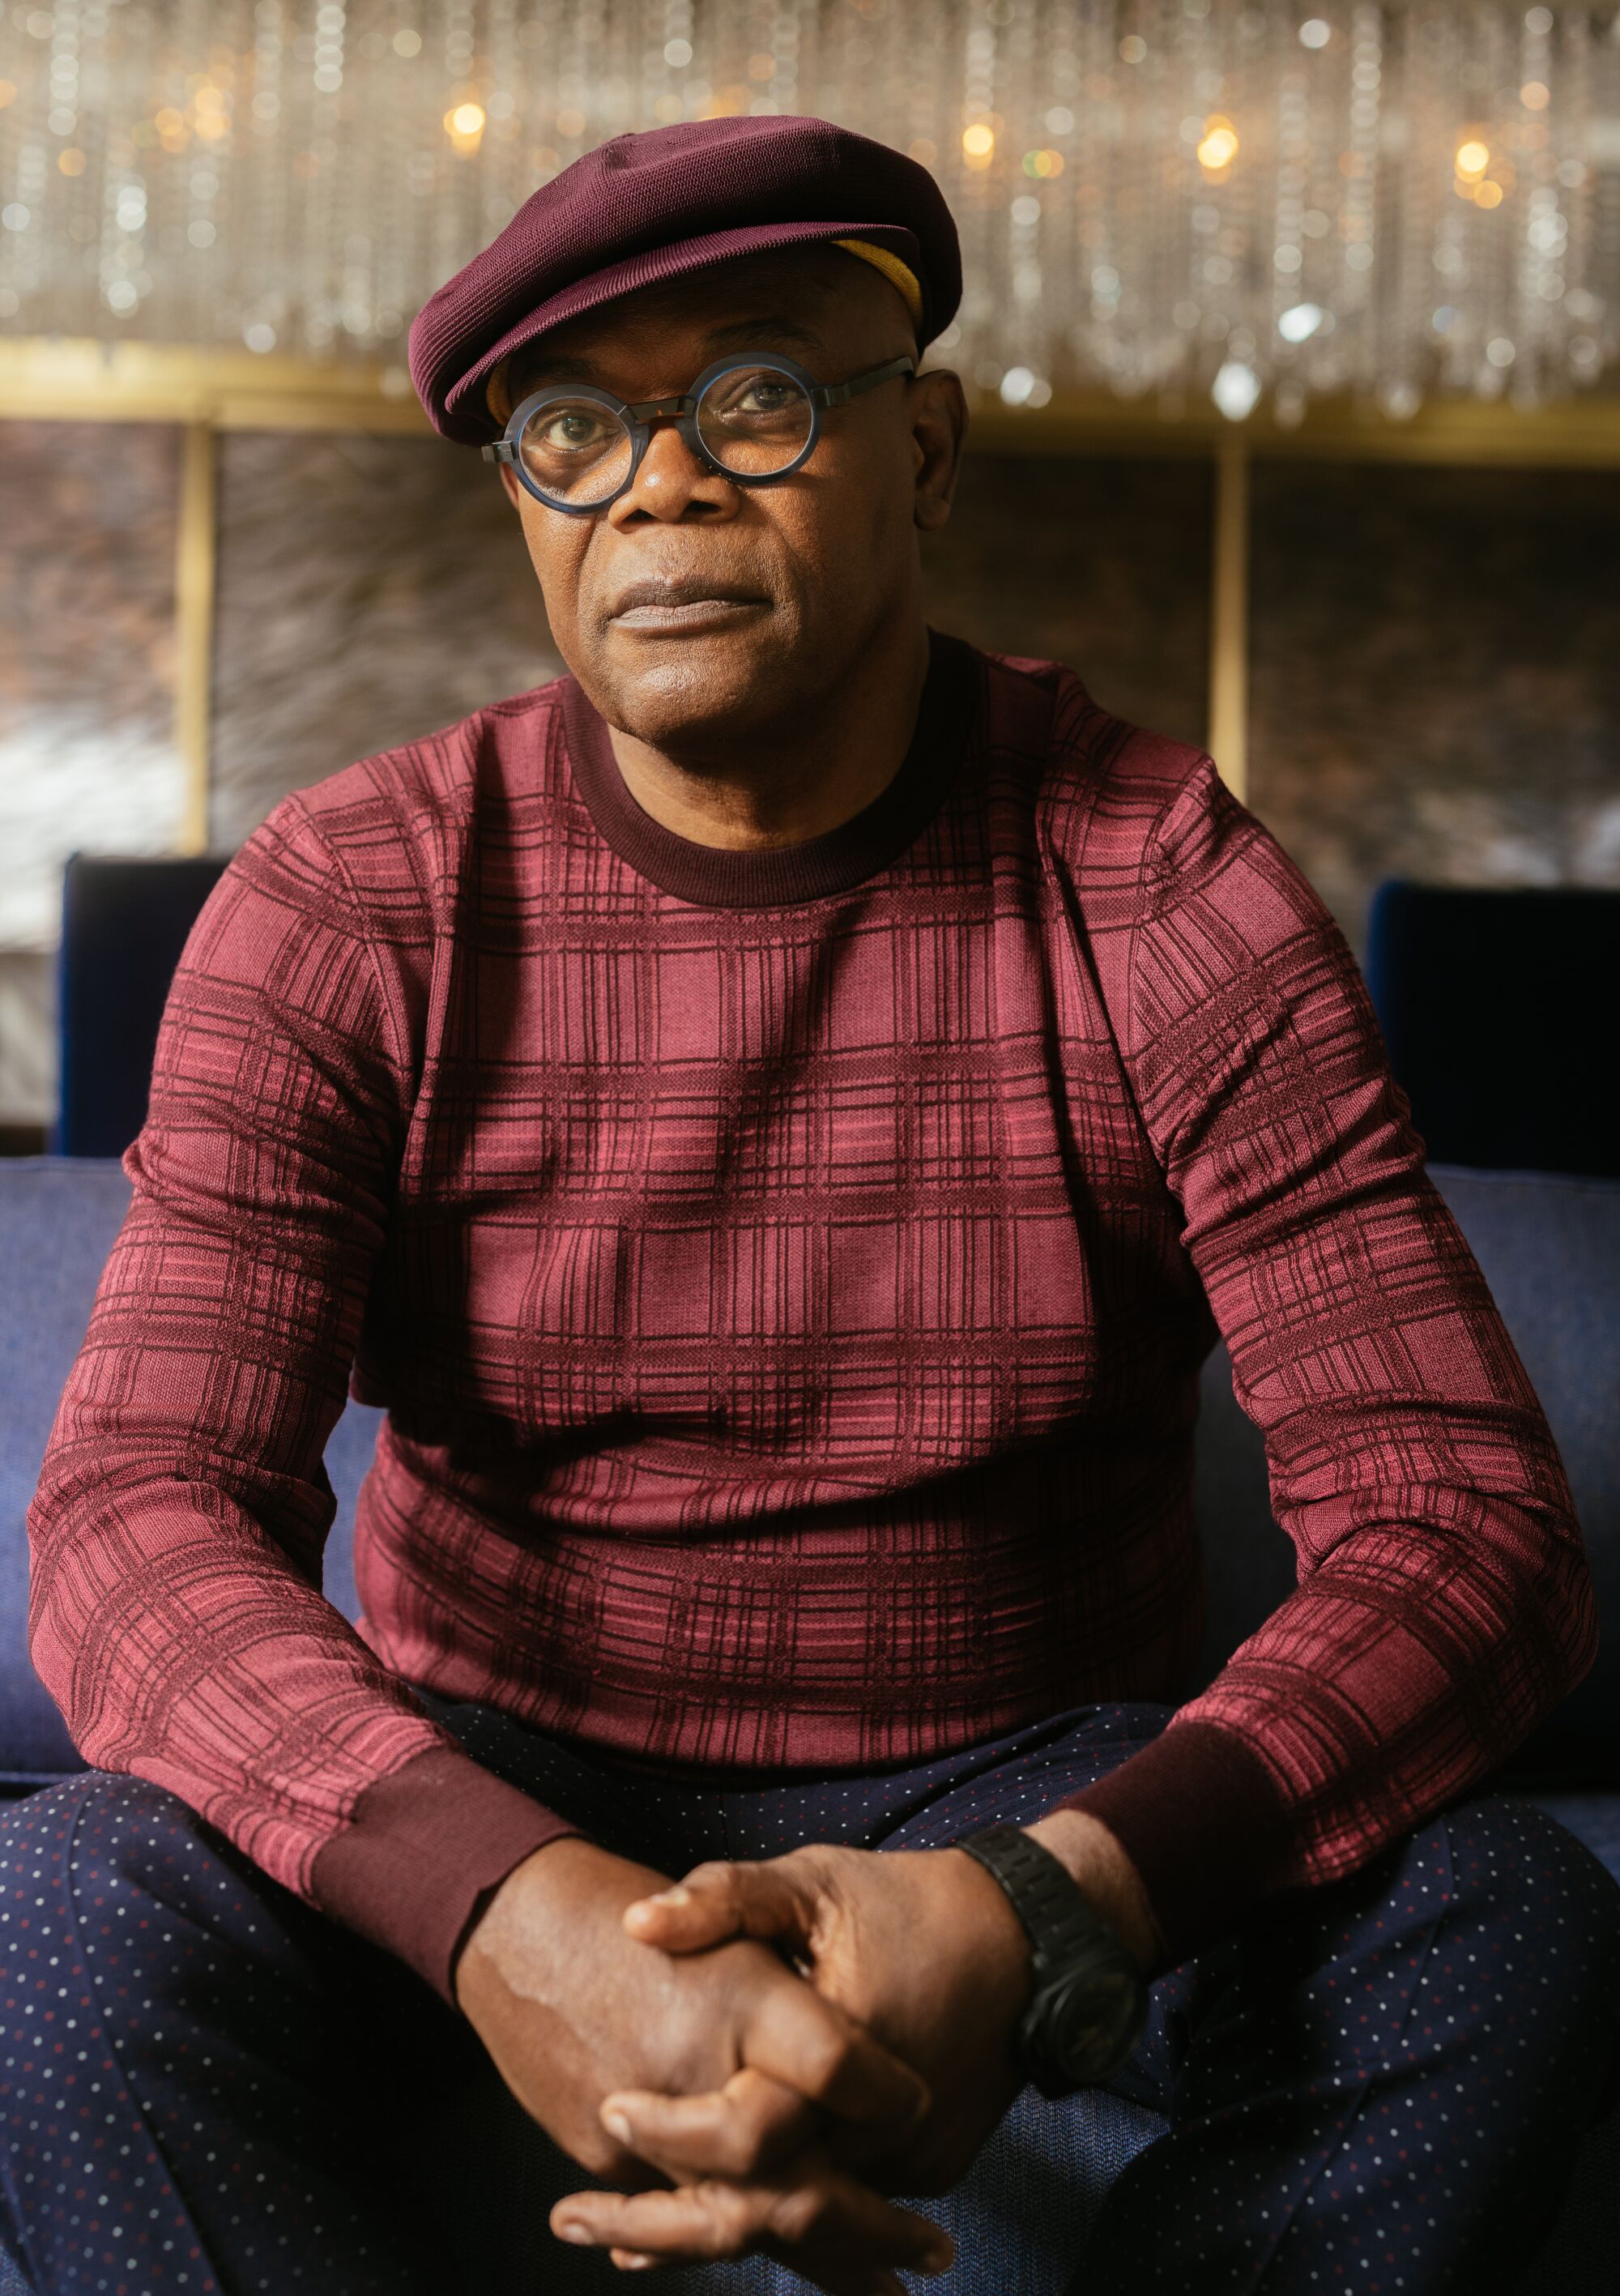 A man in a burgundy sweater sits on a couch with his hands clasped.